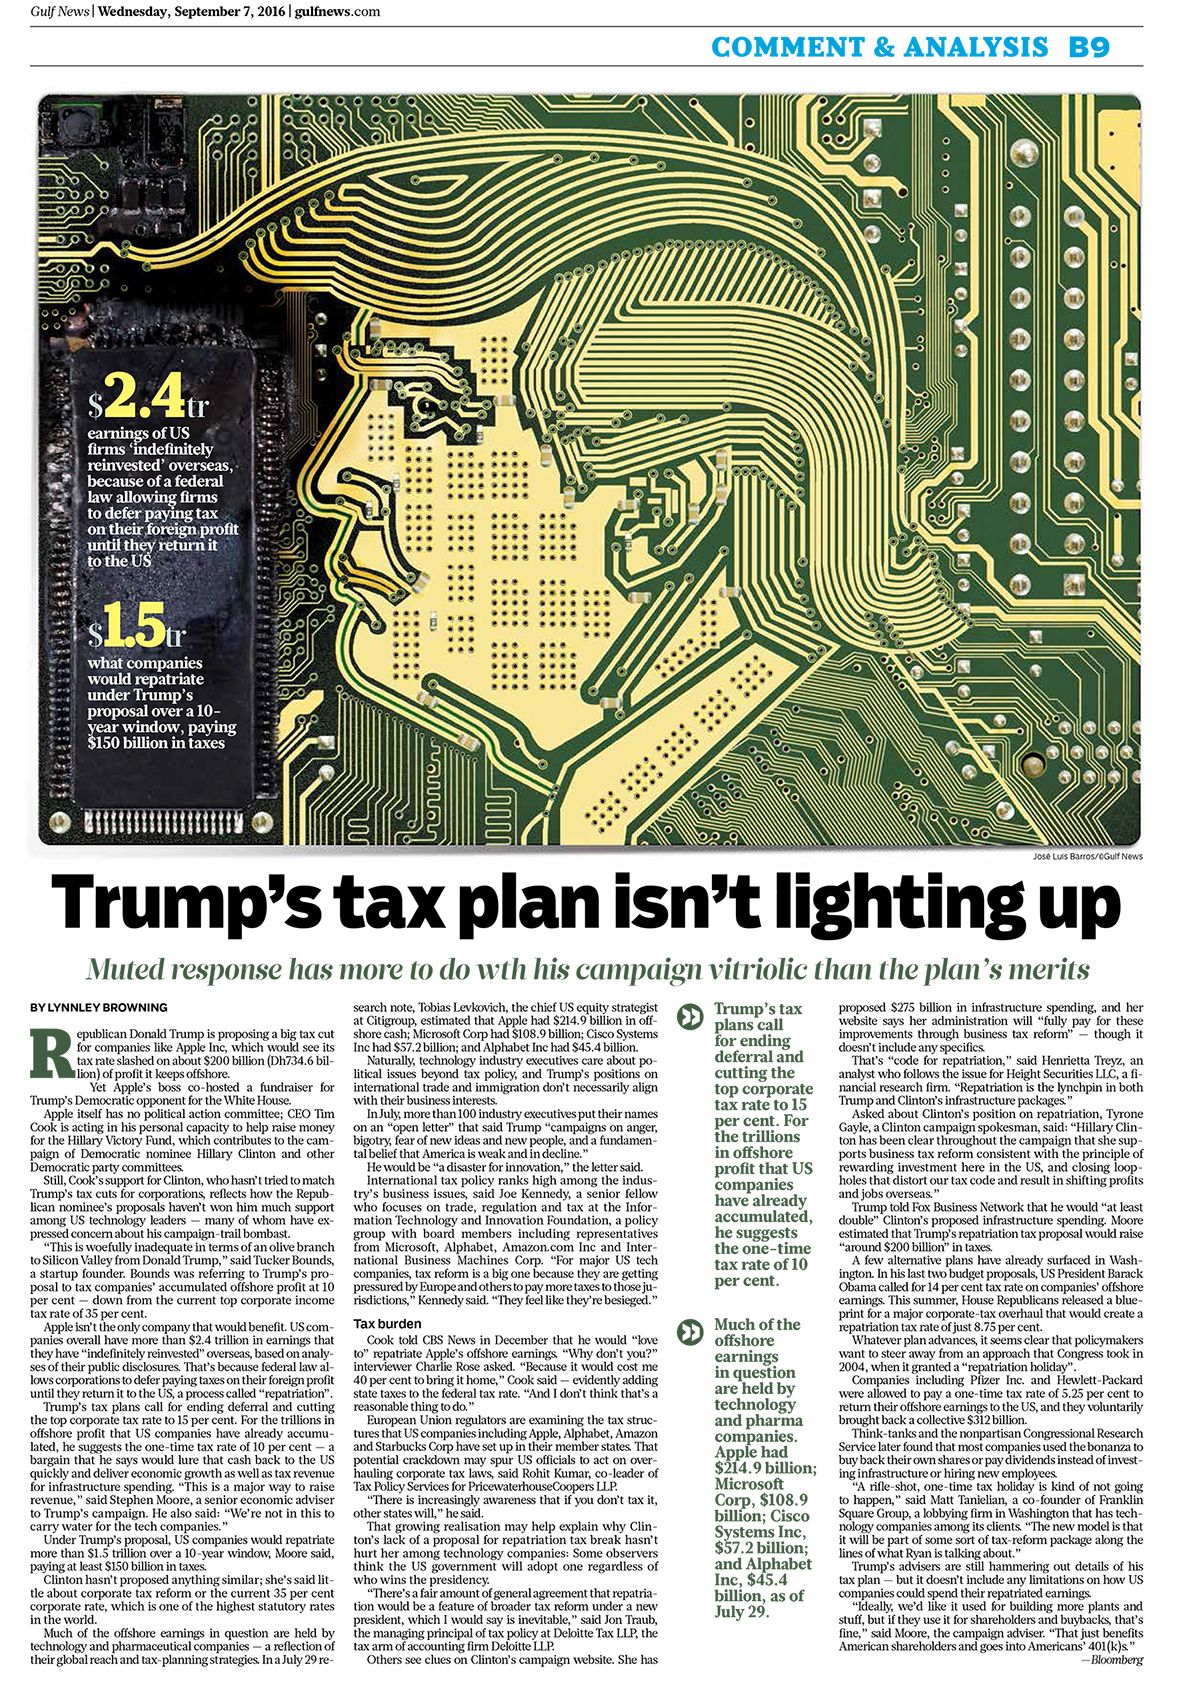 Trump Tax plan Silicon Valley Lynnley Browning